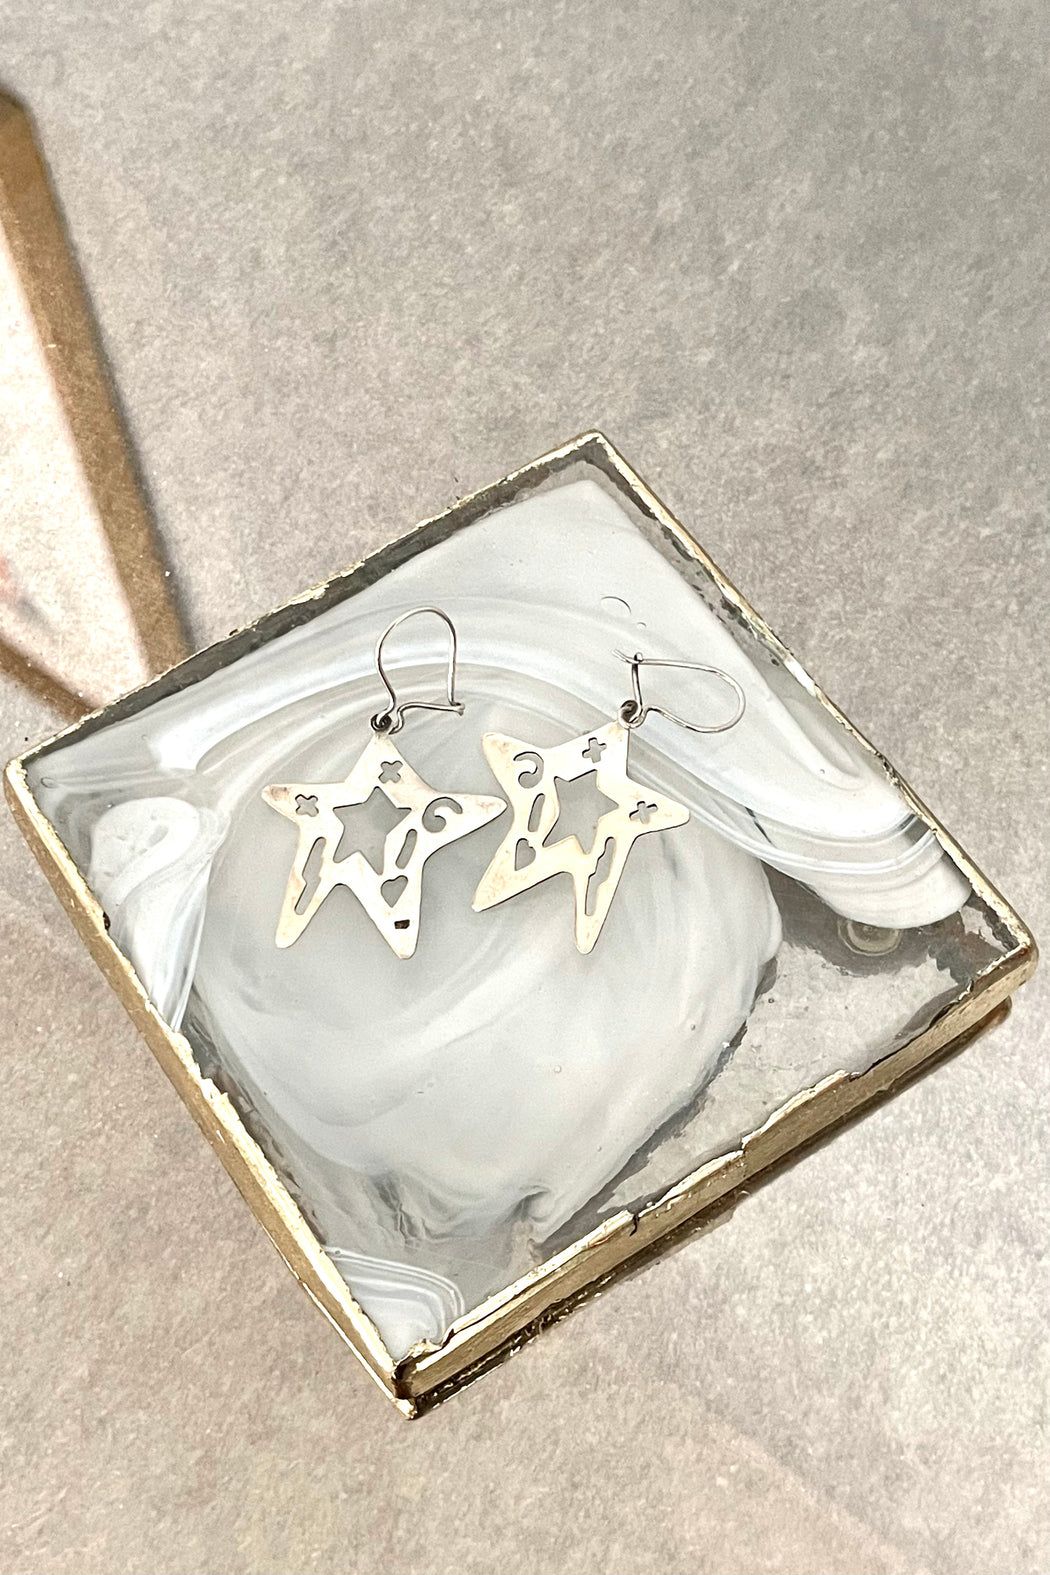 VINTAGE MEXICAN SILVER STAR EARRINGS